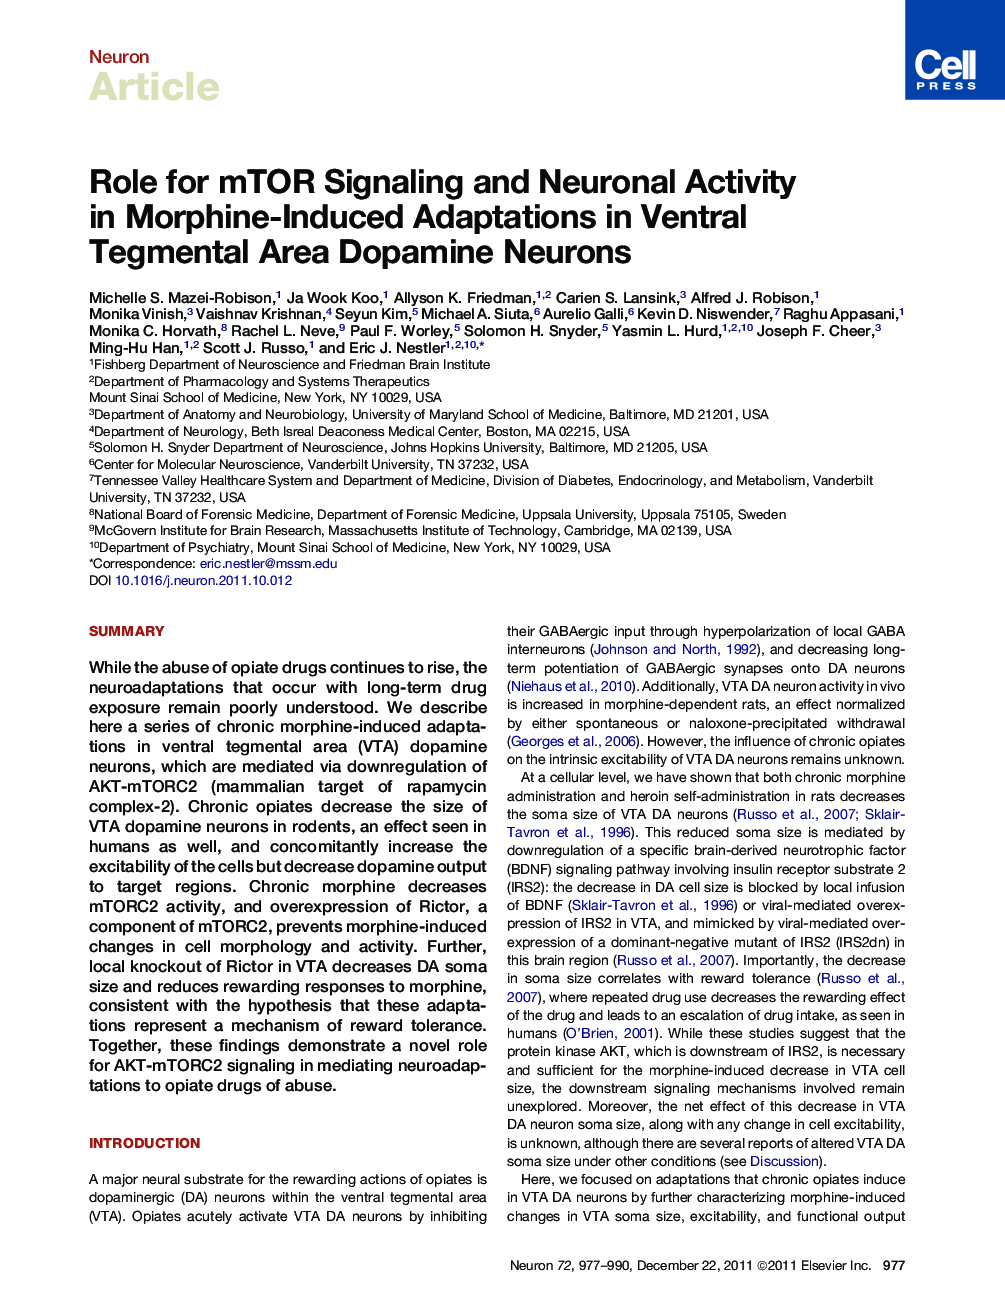 Role for mTOR Signaling and Neuronal Activity in Morphine-Induced Adaptations in Ventral Tegmental Area Dopamine Neurons